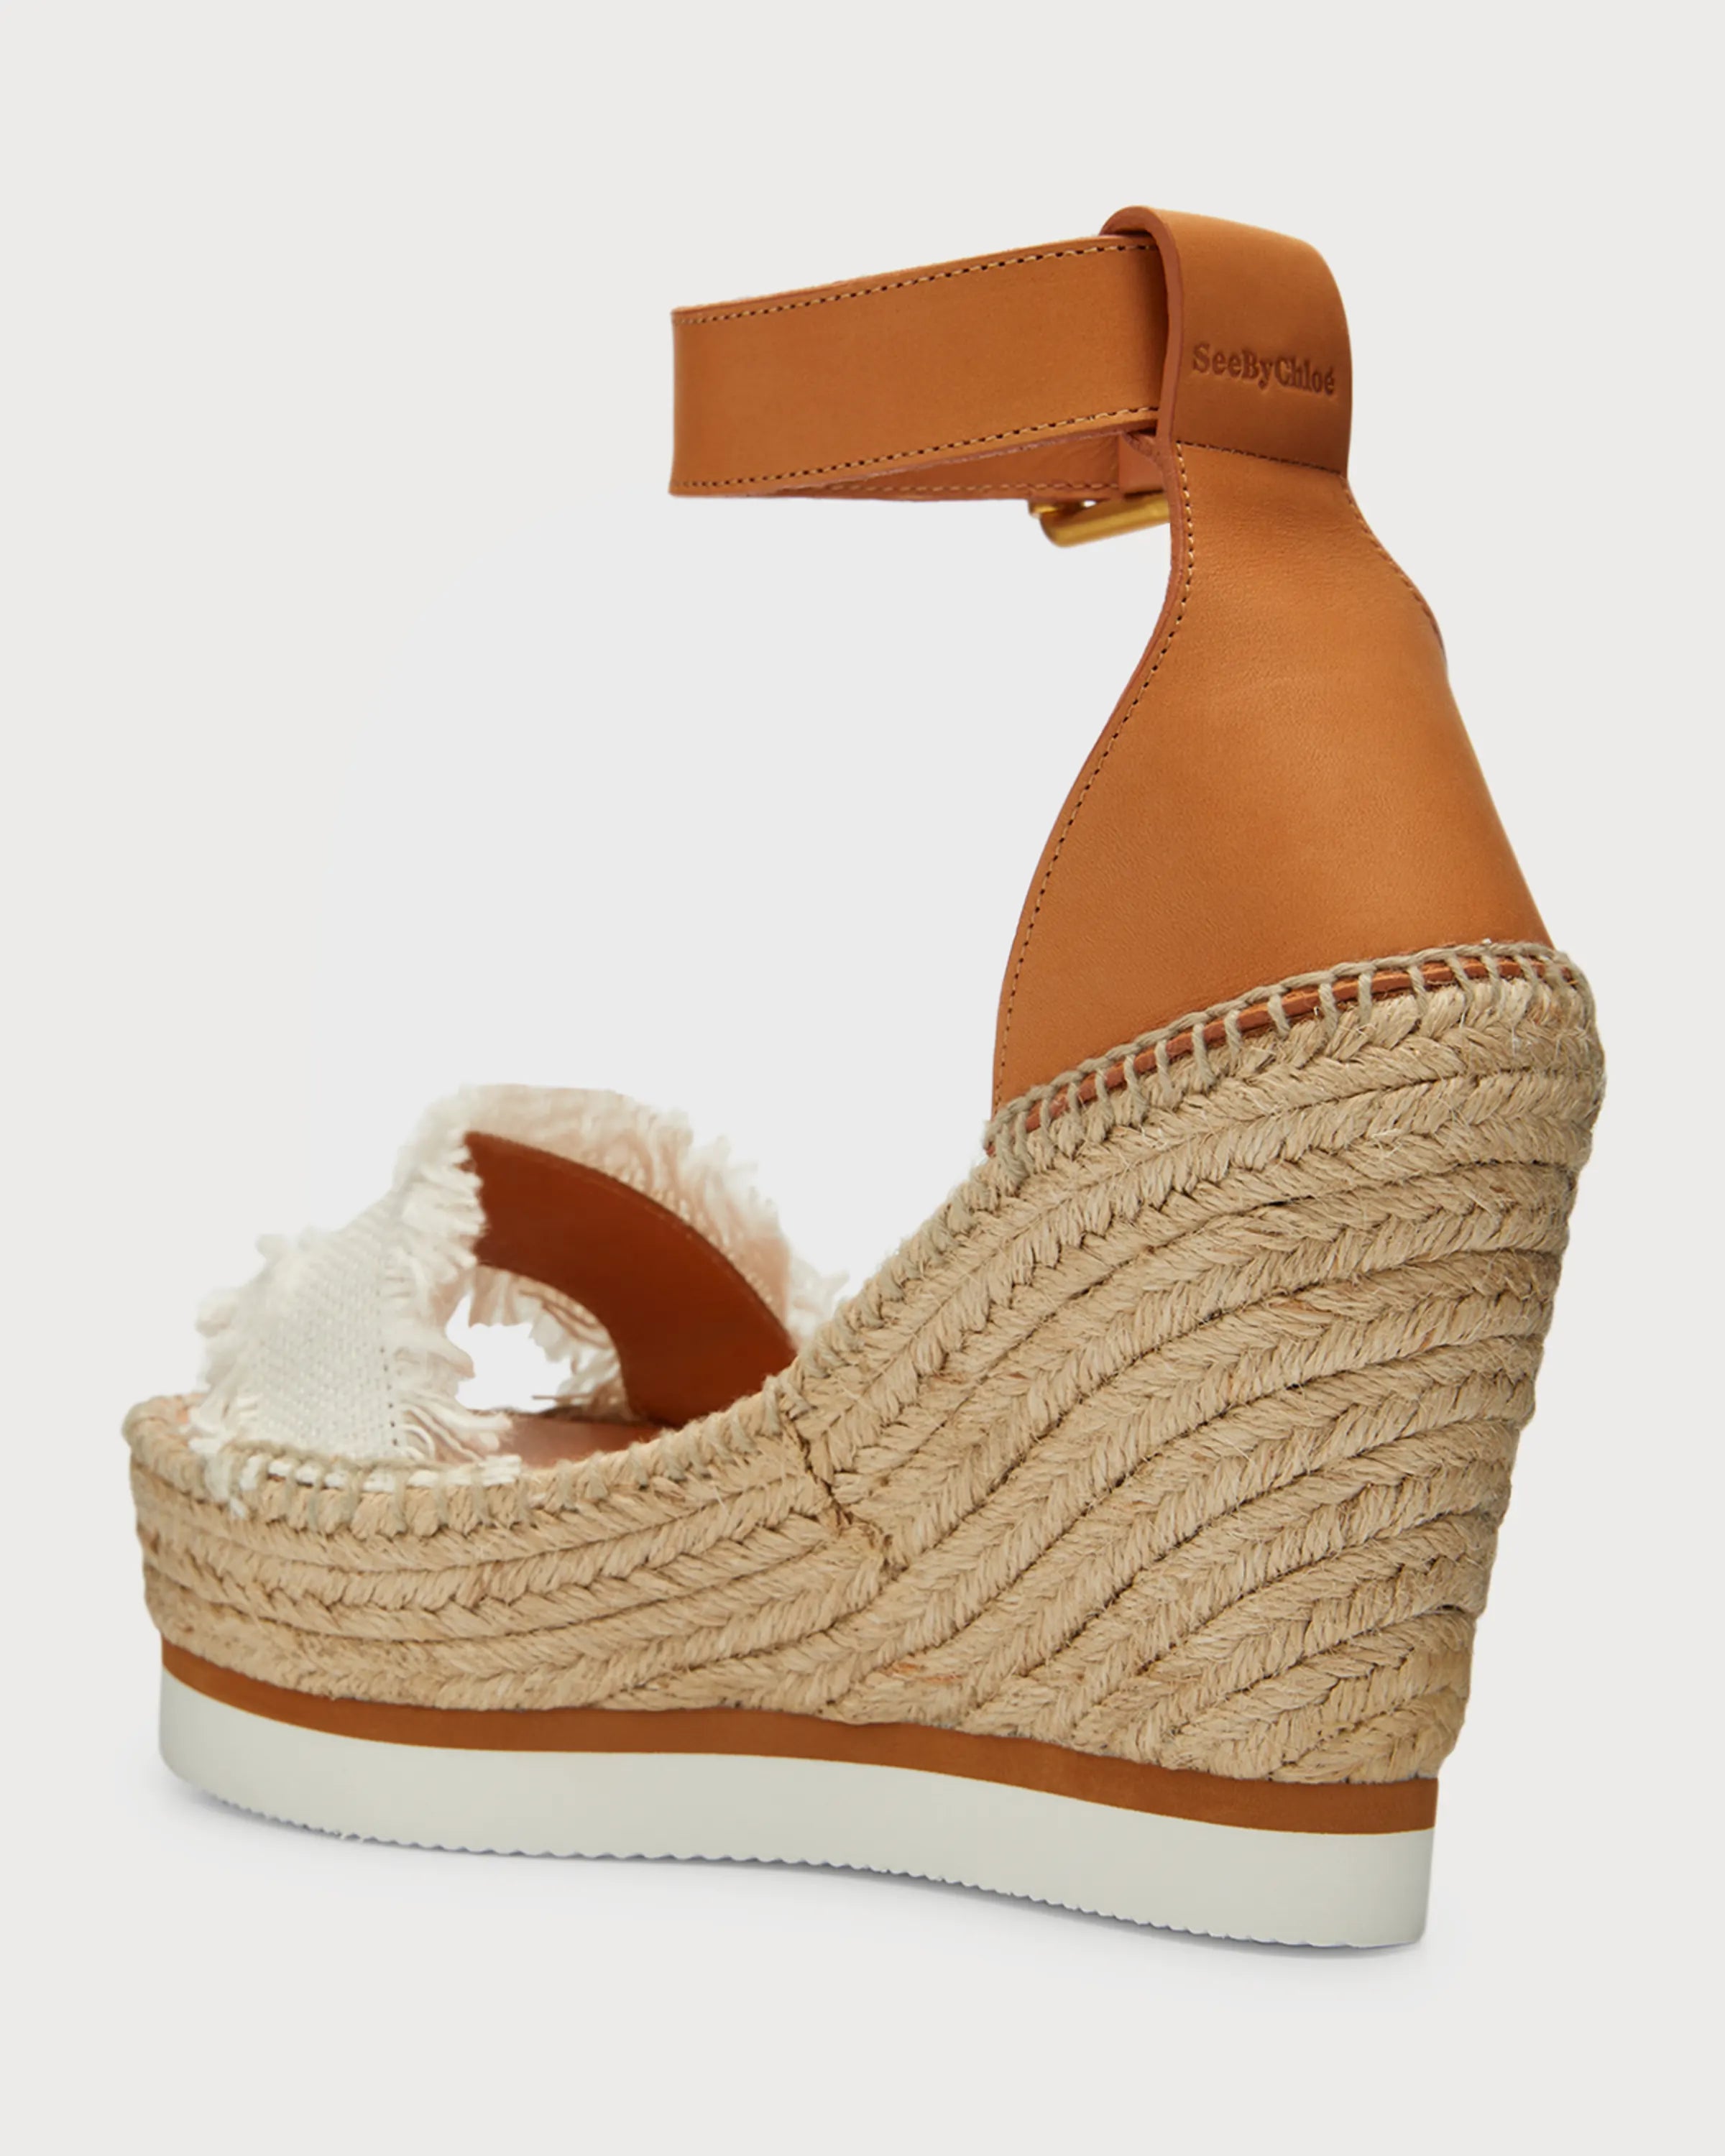 See By Chloe Frayed Wedges